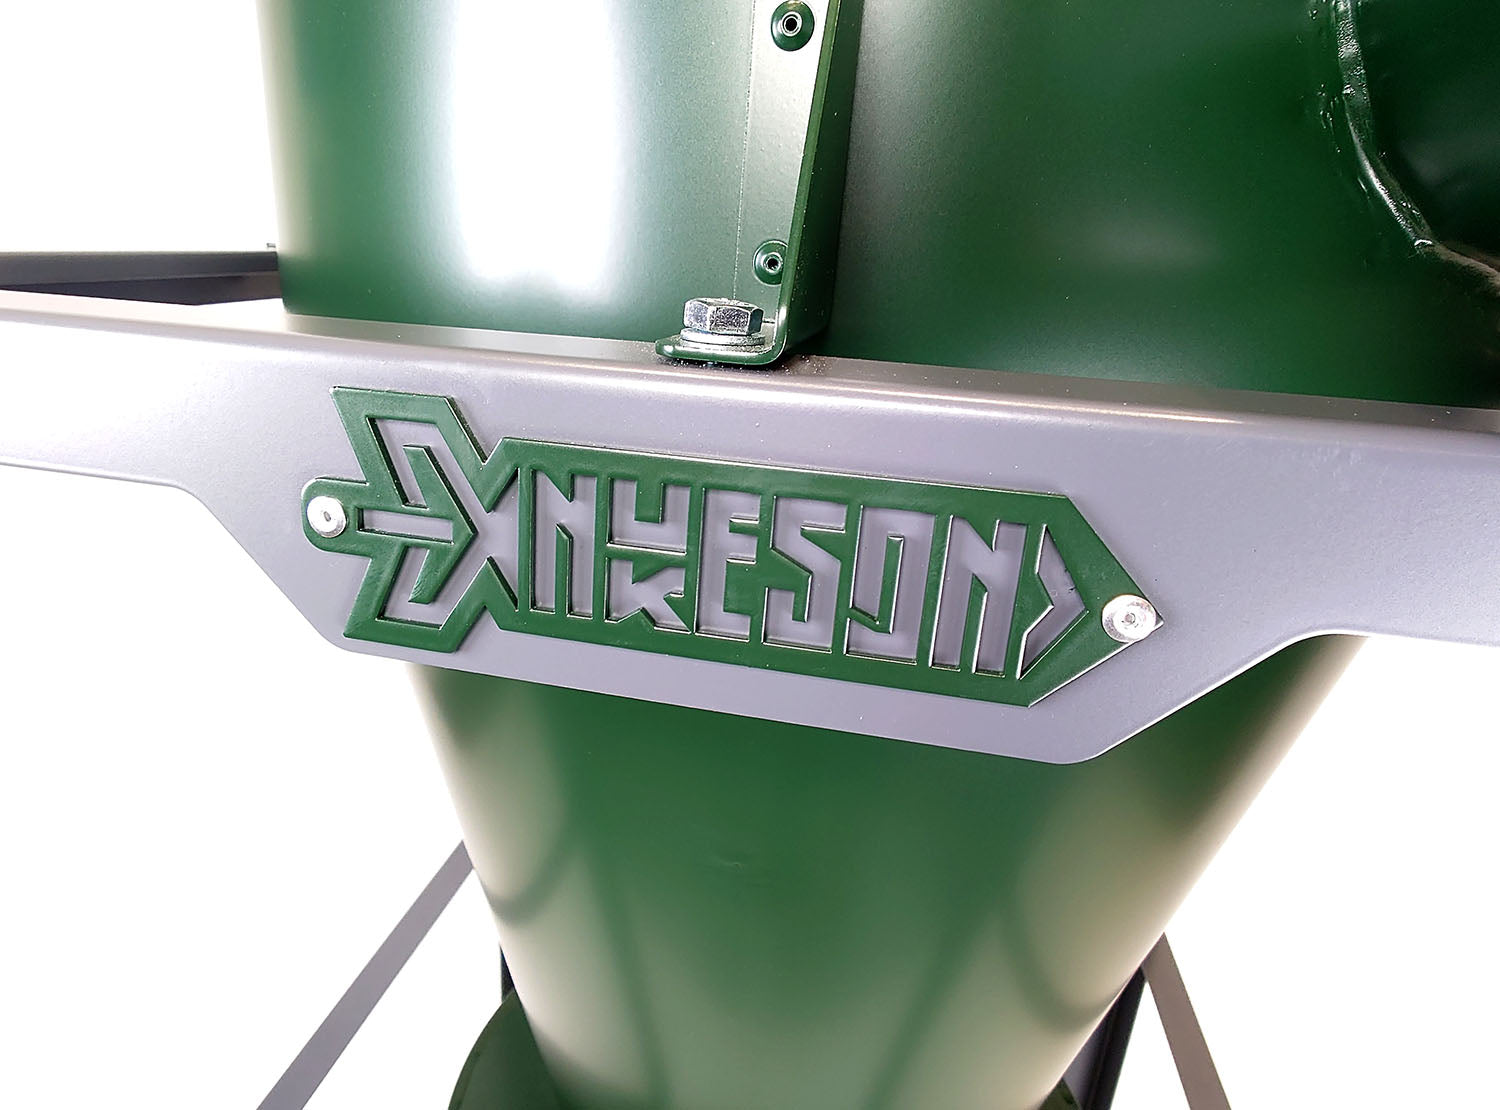 Nukeson CNC Plasma Table Dust Extraction Cyclone